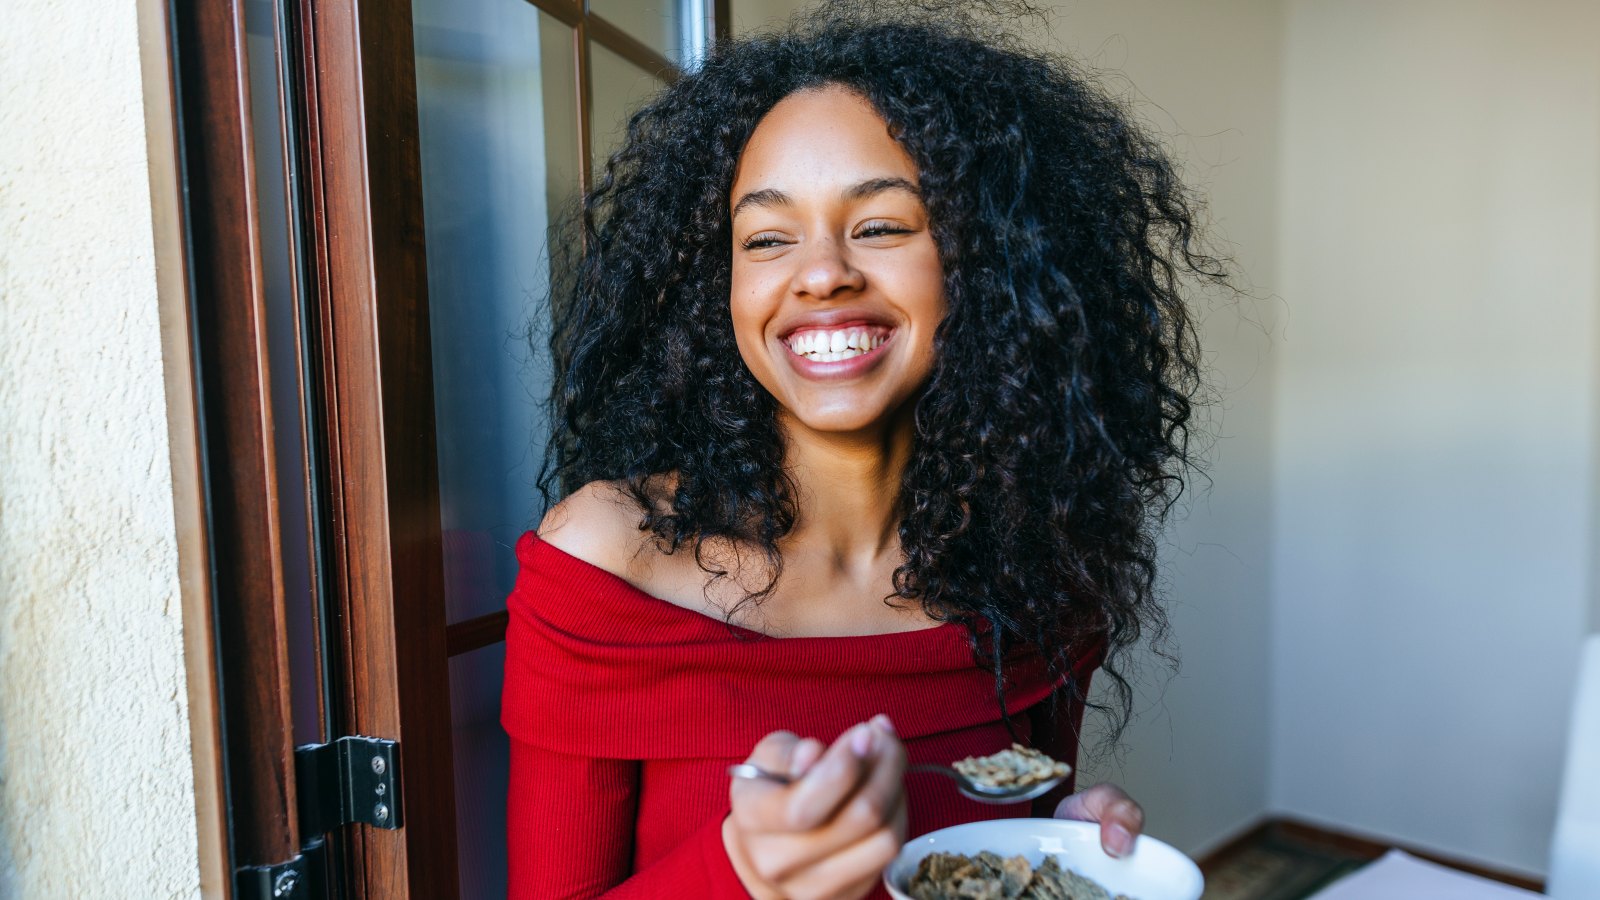 woman smiling and eating cereal